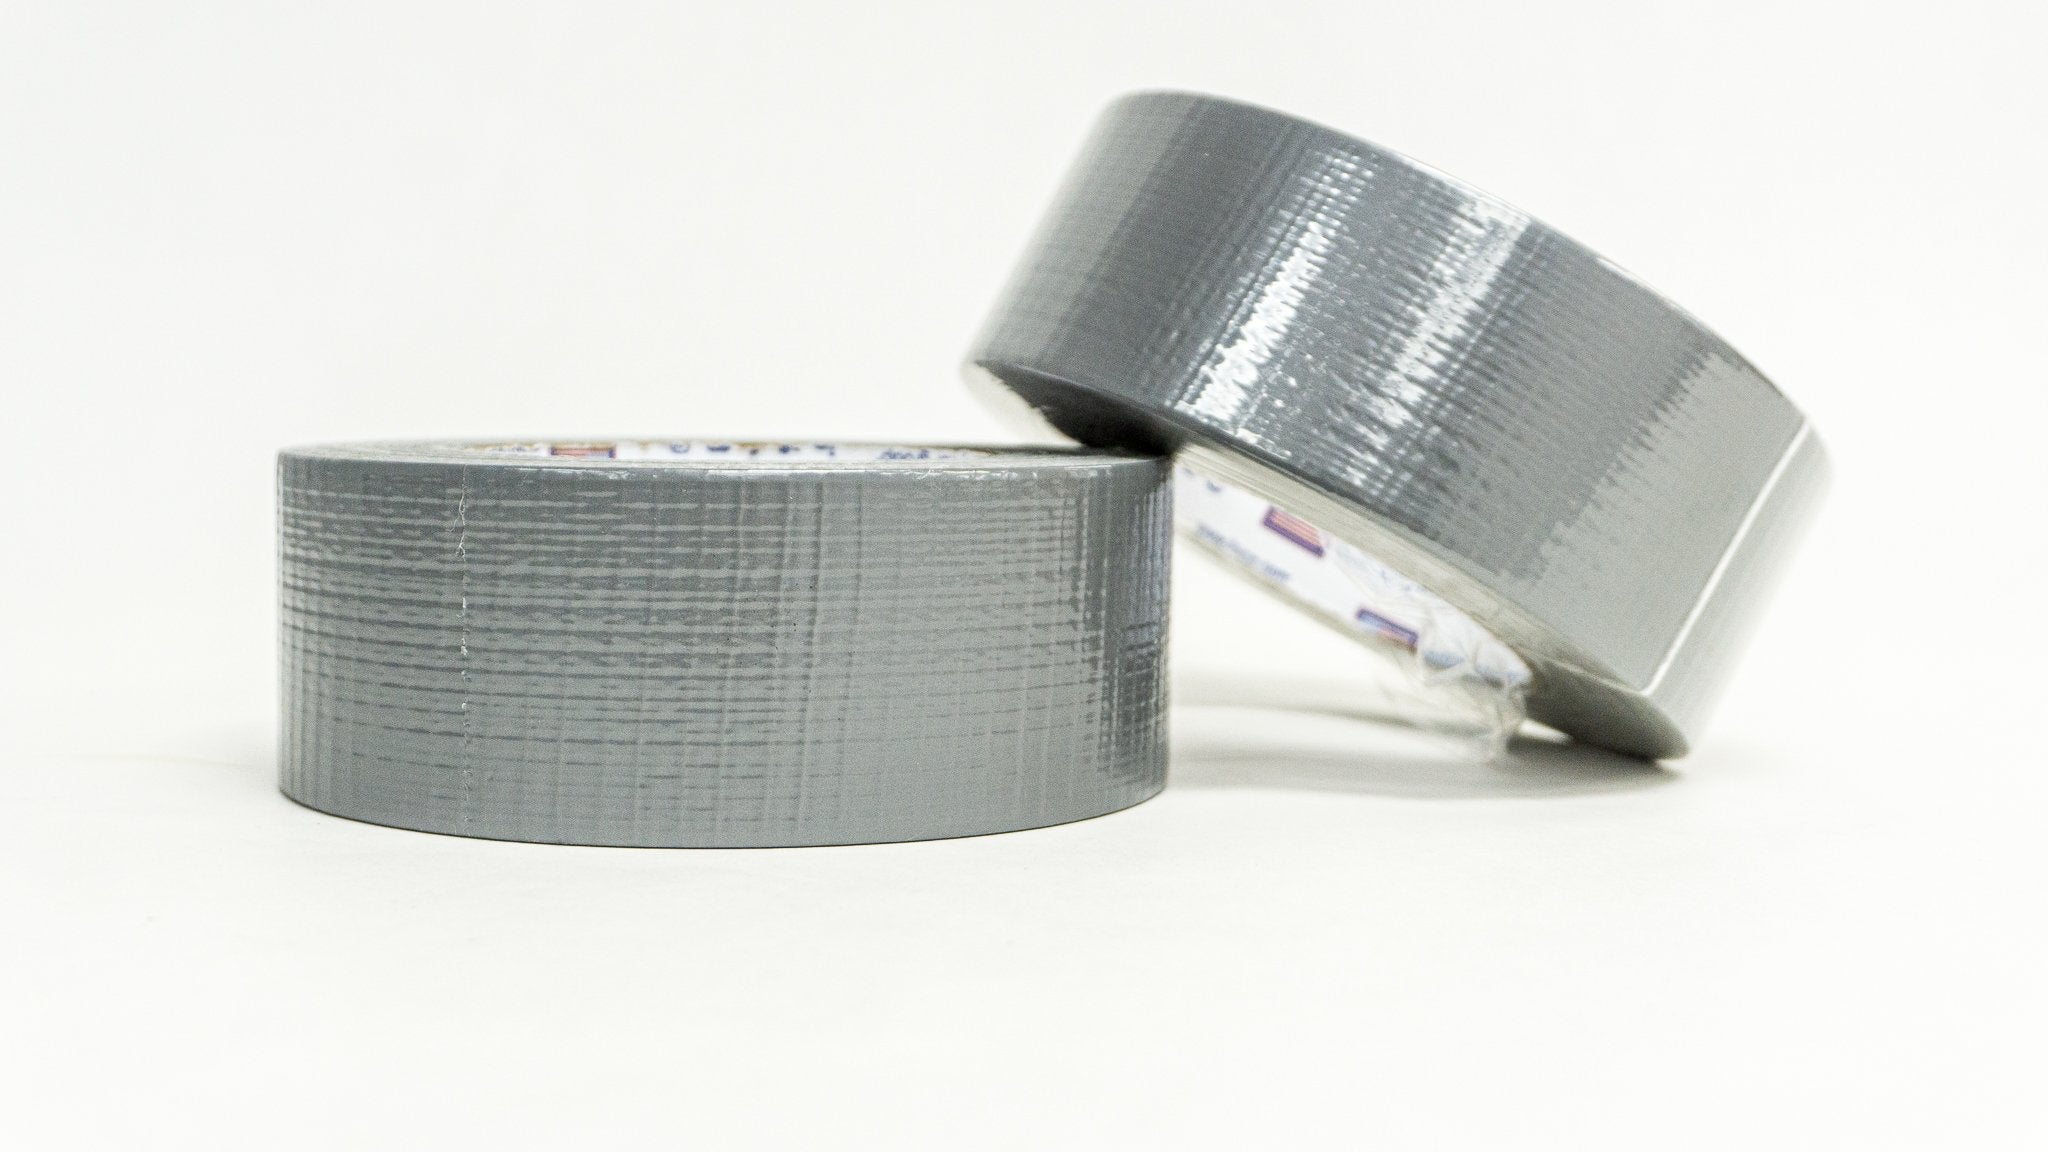 AKT SILVER HEAT RESISTANT TAPE 1/2 INC PACK OF 2 25 cm Spike (stagecraft)  Price in India - Buy AKT SILVER HEAT RESISTANT TAPE 1/2 INC PACK OF 2 25 cm  Spike (stagecraft) online at